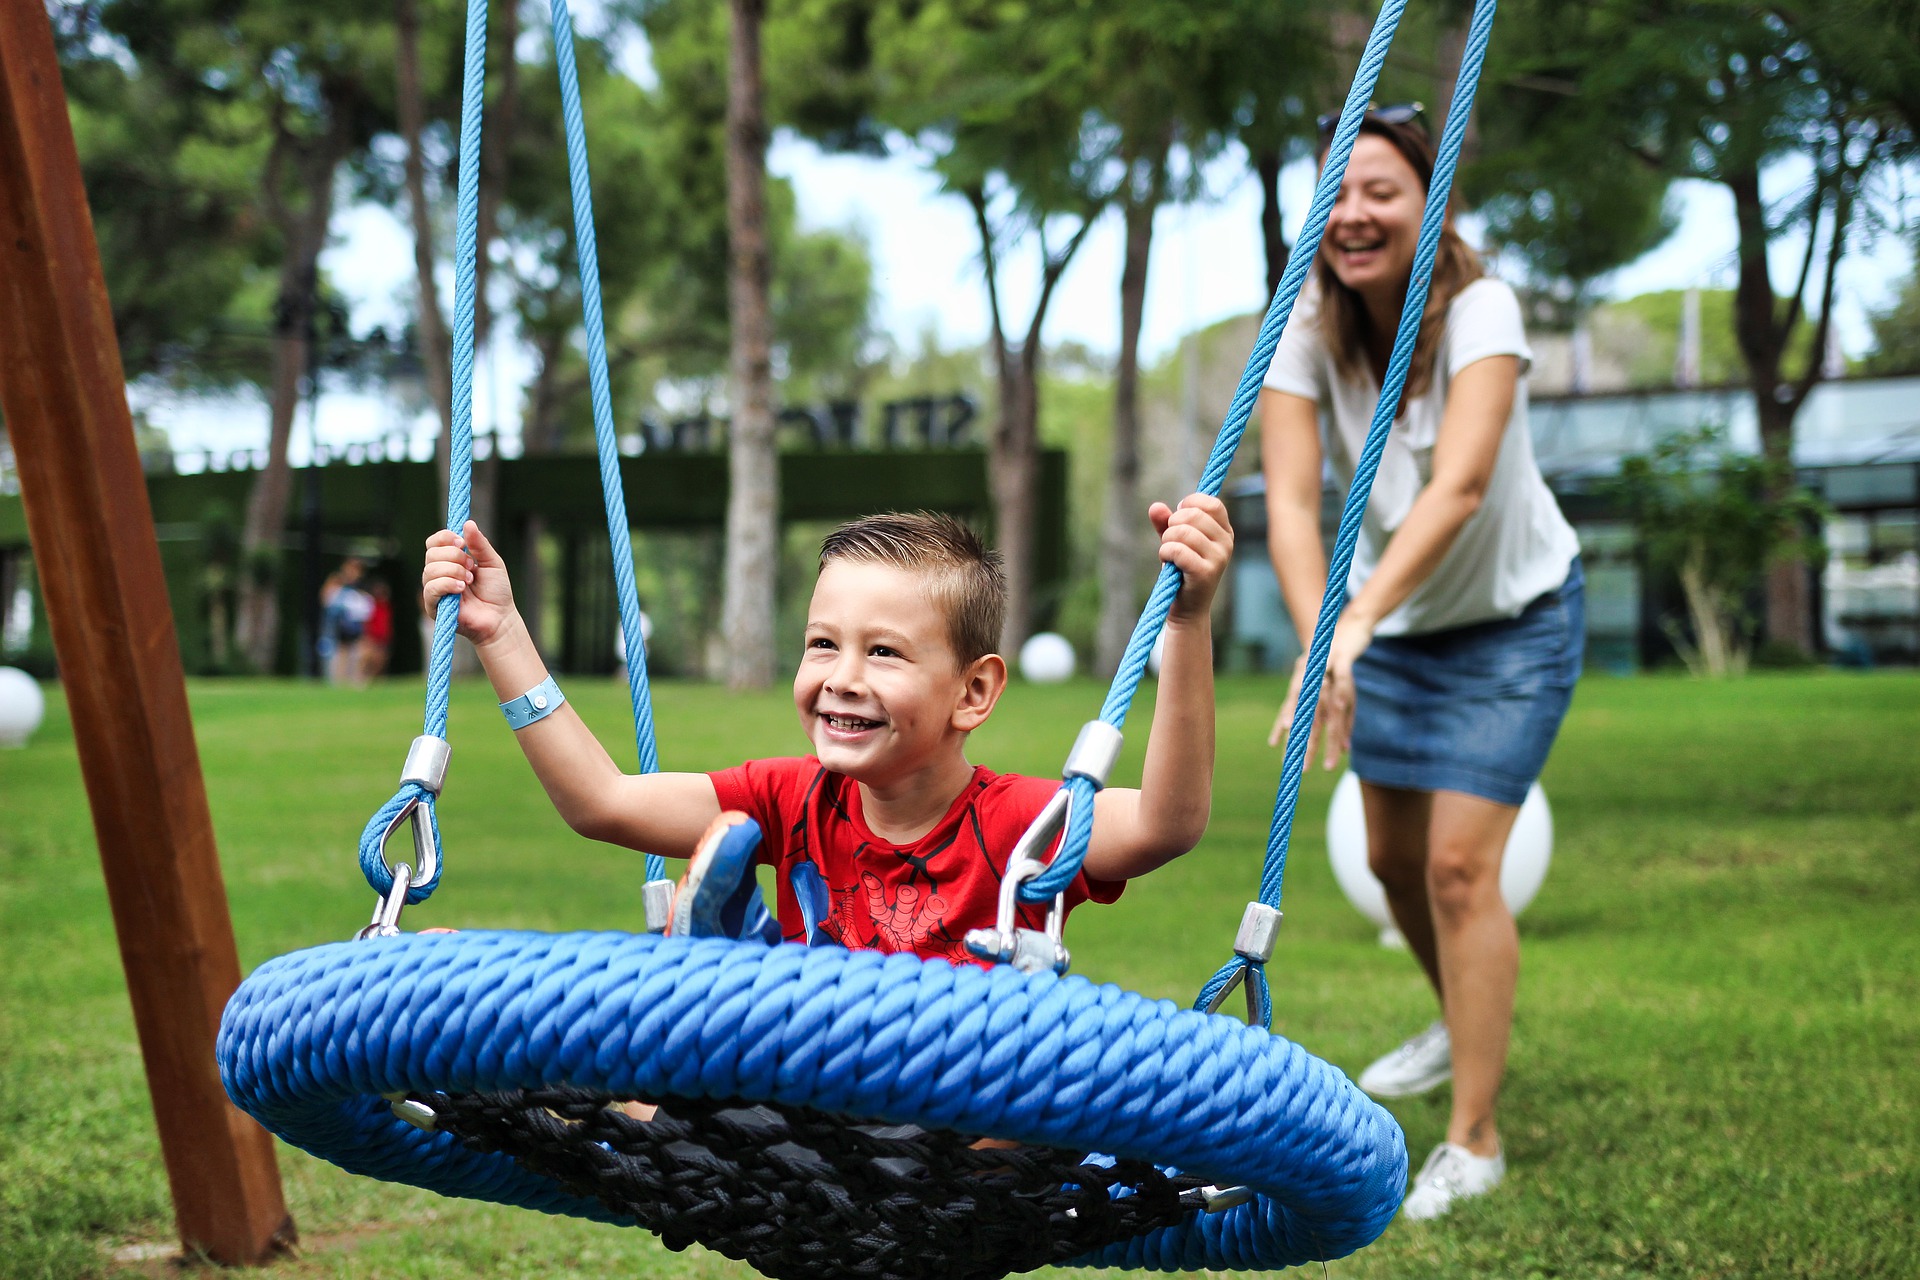 Smiling son on round web swing being pushed by his mother